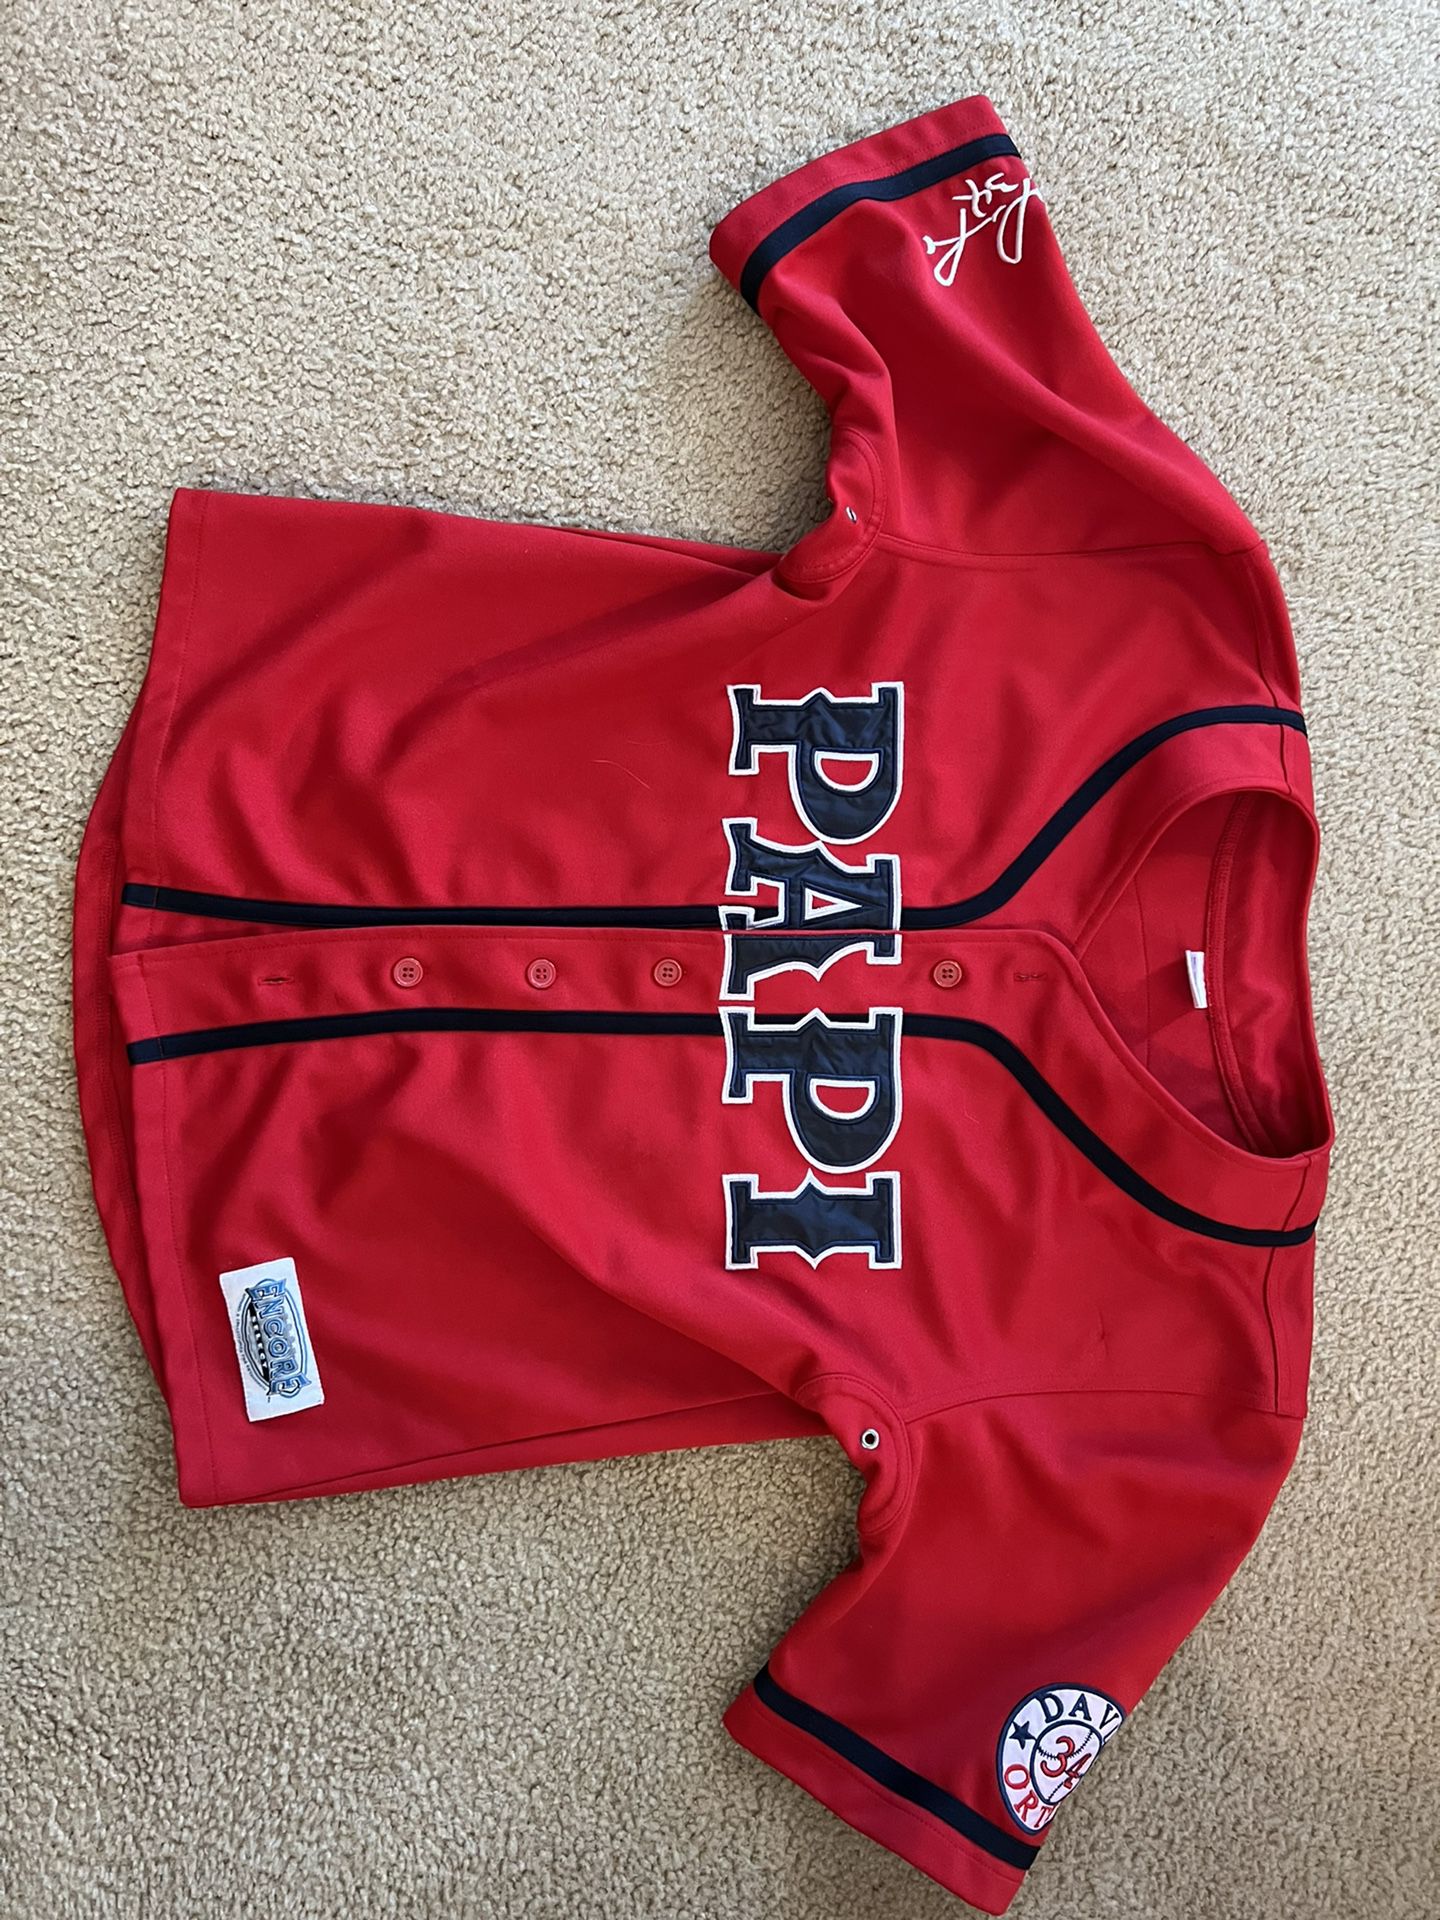 Encore Select Boston Red Sox David Ortiz Big Papi Jersey Youth Large 14-16  for Sale in North Attleborough, MA - OfferUp